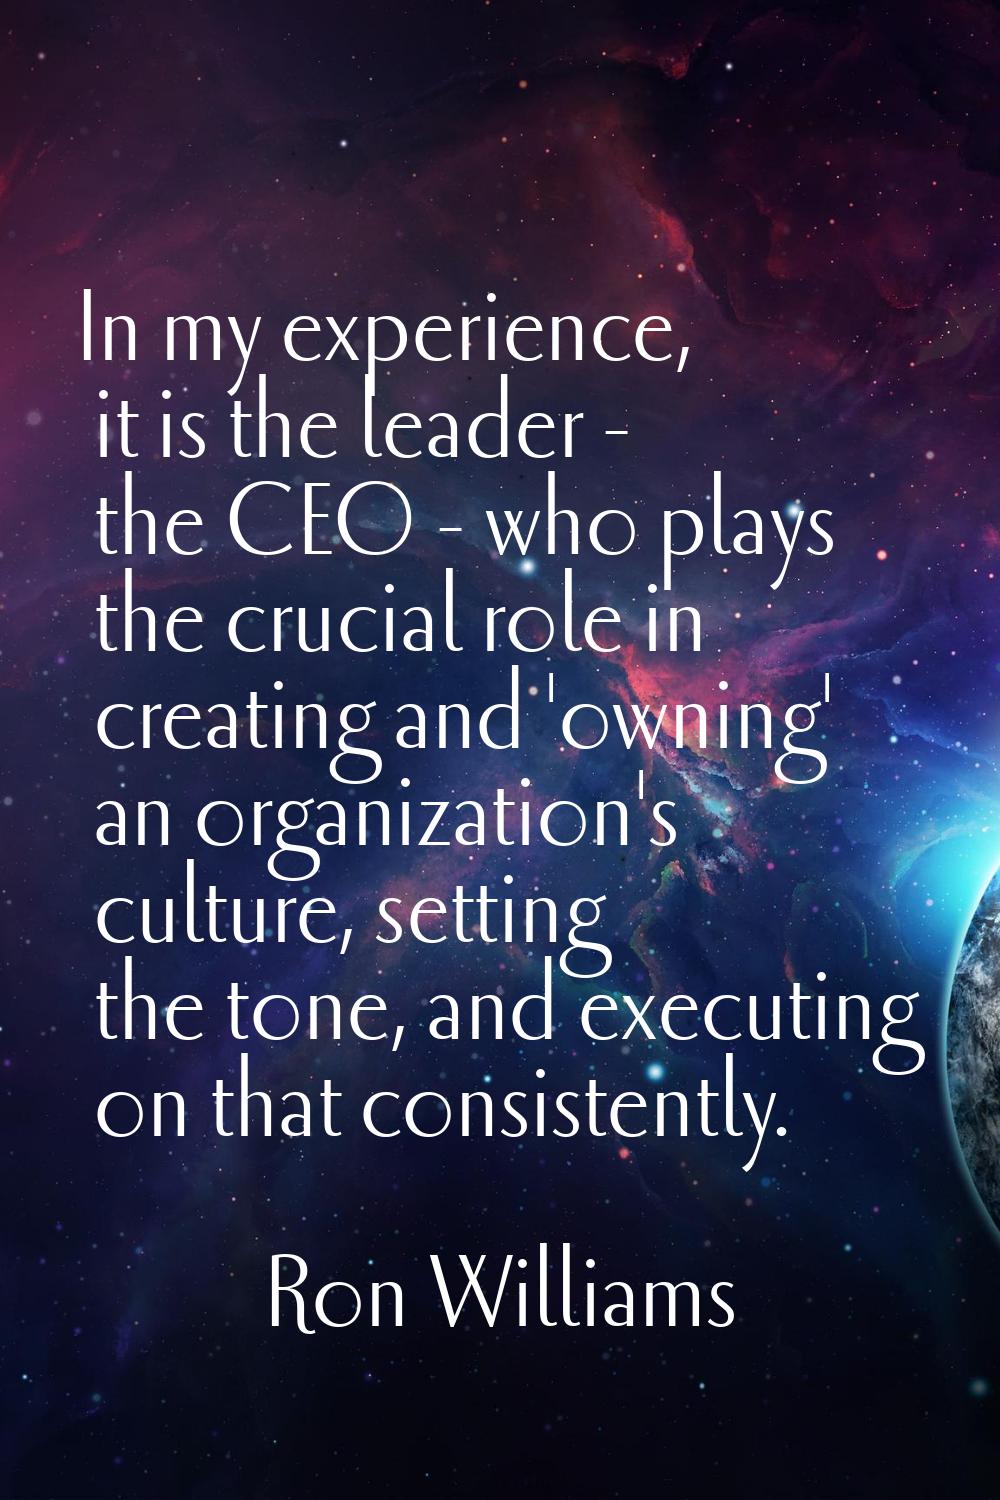 In my experience, it is the leader - the CEO - who plays the crucial role in creating and 'owning' 